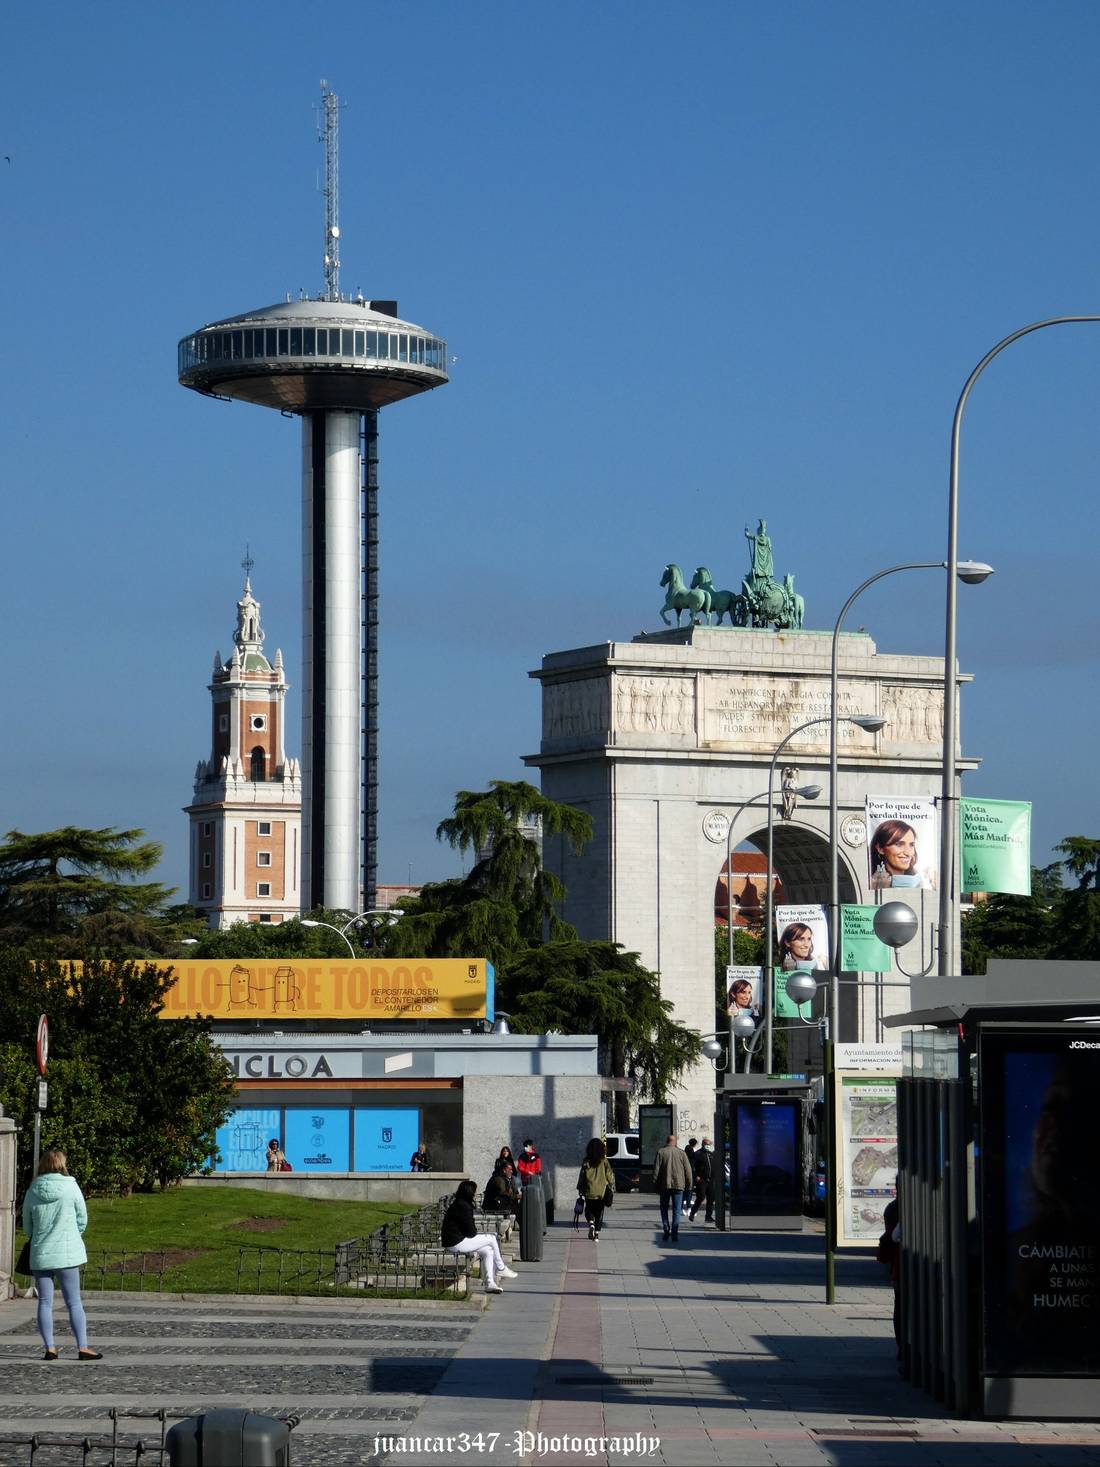 Moncloa: the Lighthouse rising above the Arch of Victory (Puerta de Moncloa)